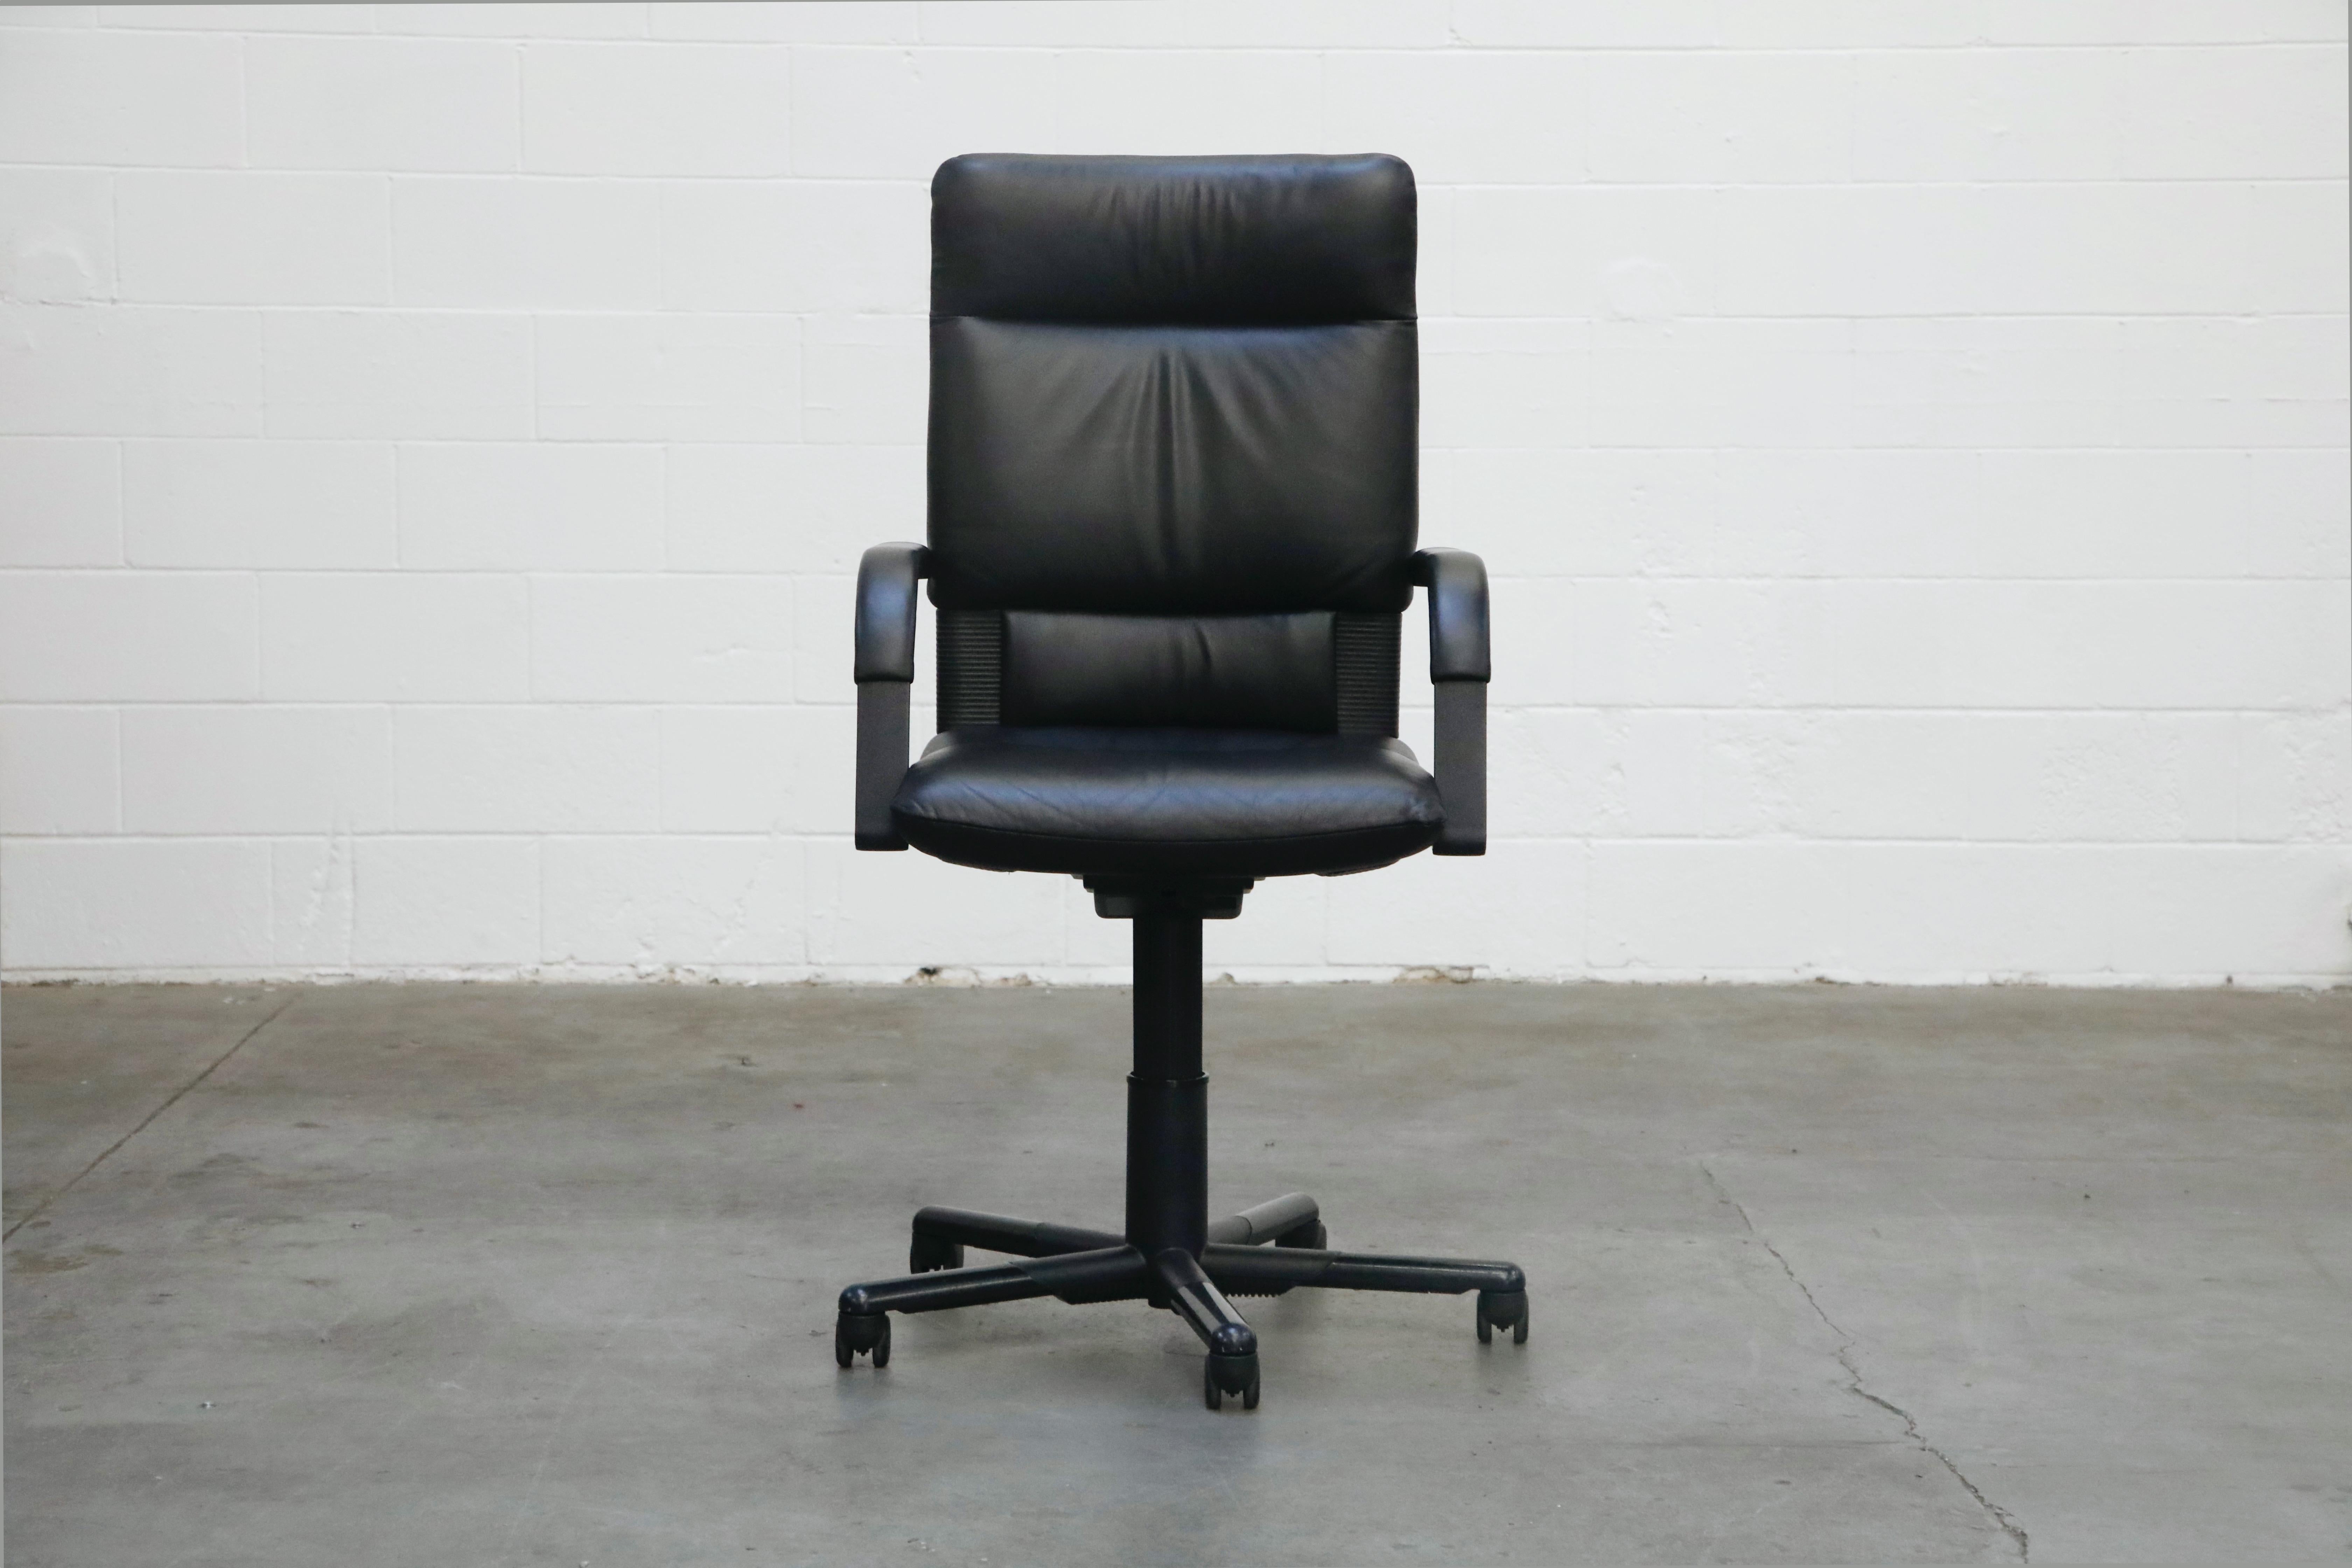 A spectacular example of a Mario Bellini signed highback executive desk chair for the Vitra, dated 1993 production. This Post Modern executive task chair features soft and supple black leather in excellent condition, five star height adjustable base